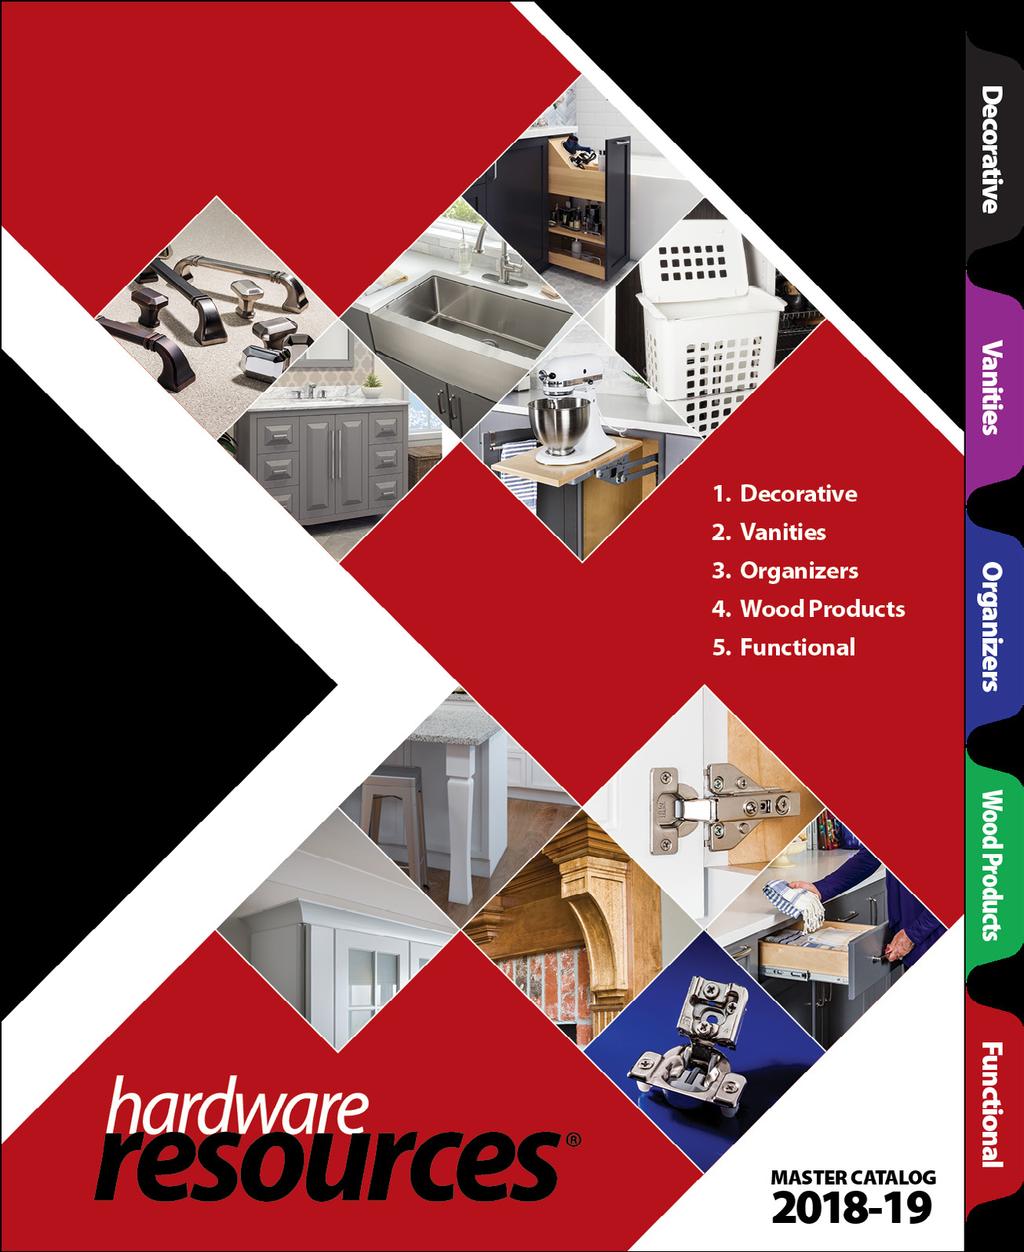 Hardware Resources Master Catalog Your source for